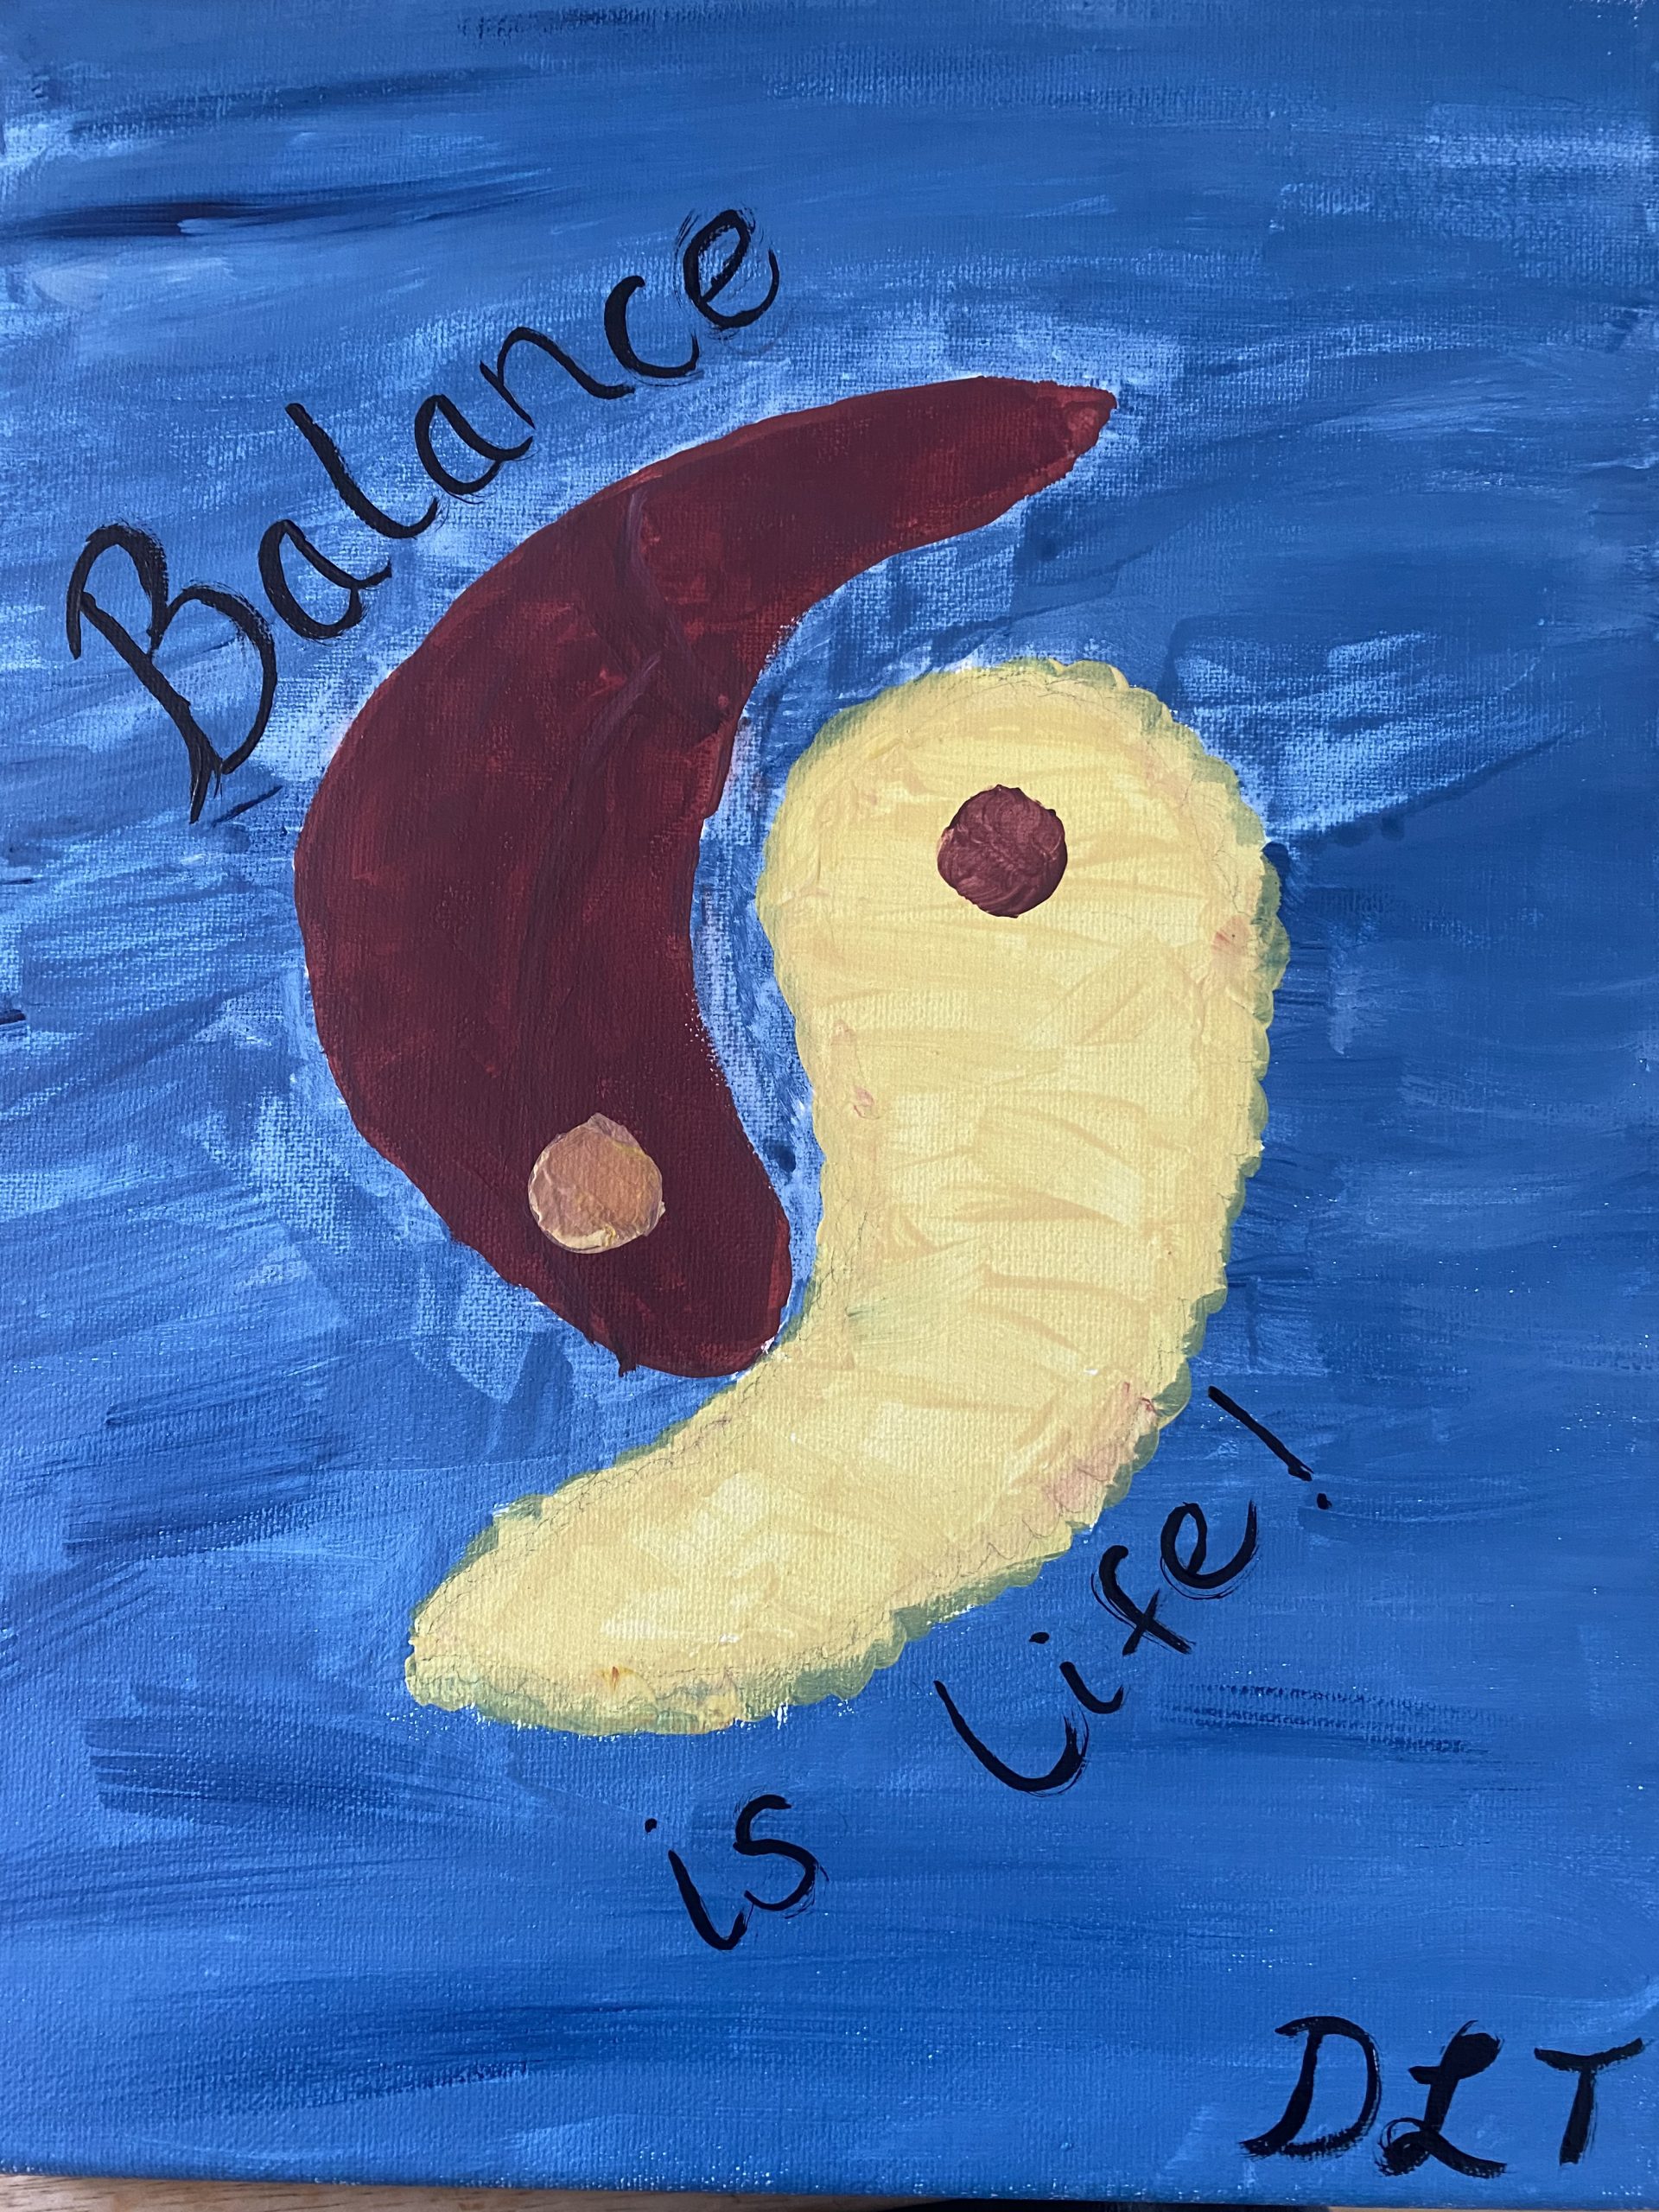 I chose to depict the liver and the pancreas in a yin yang symbol to show that the two organs work together to keep blood glucose and insulin balanced in the body. 